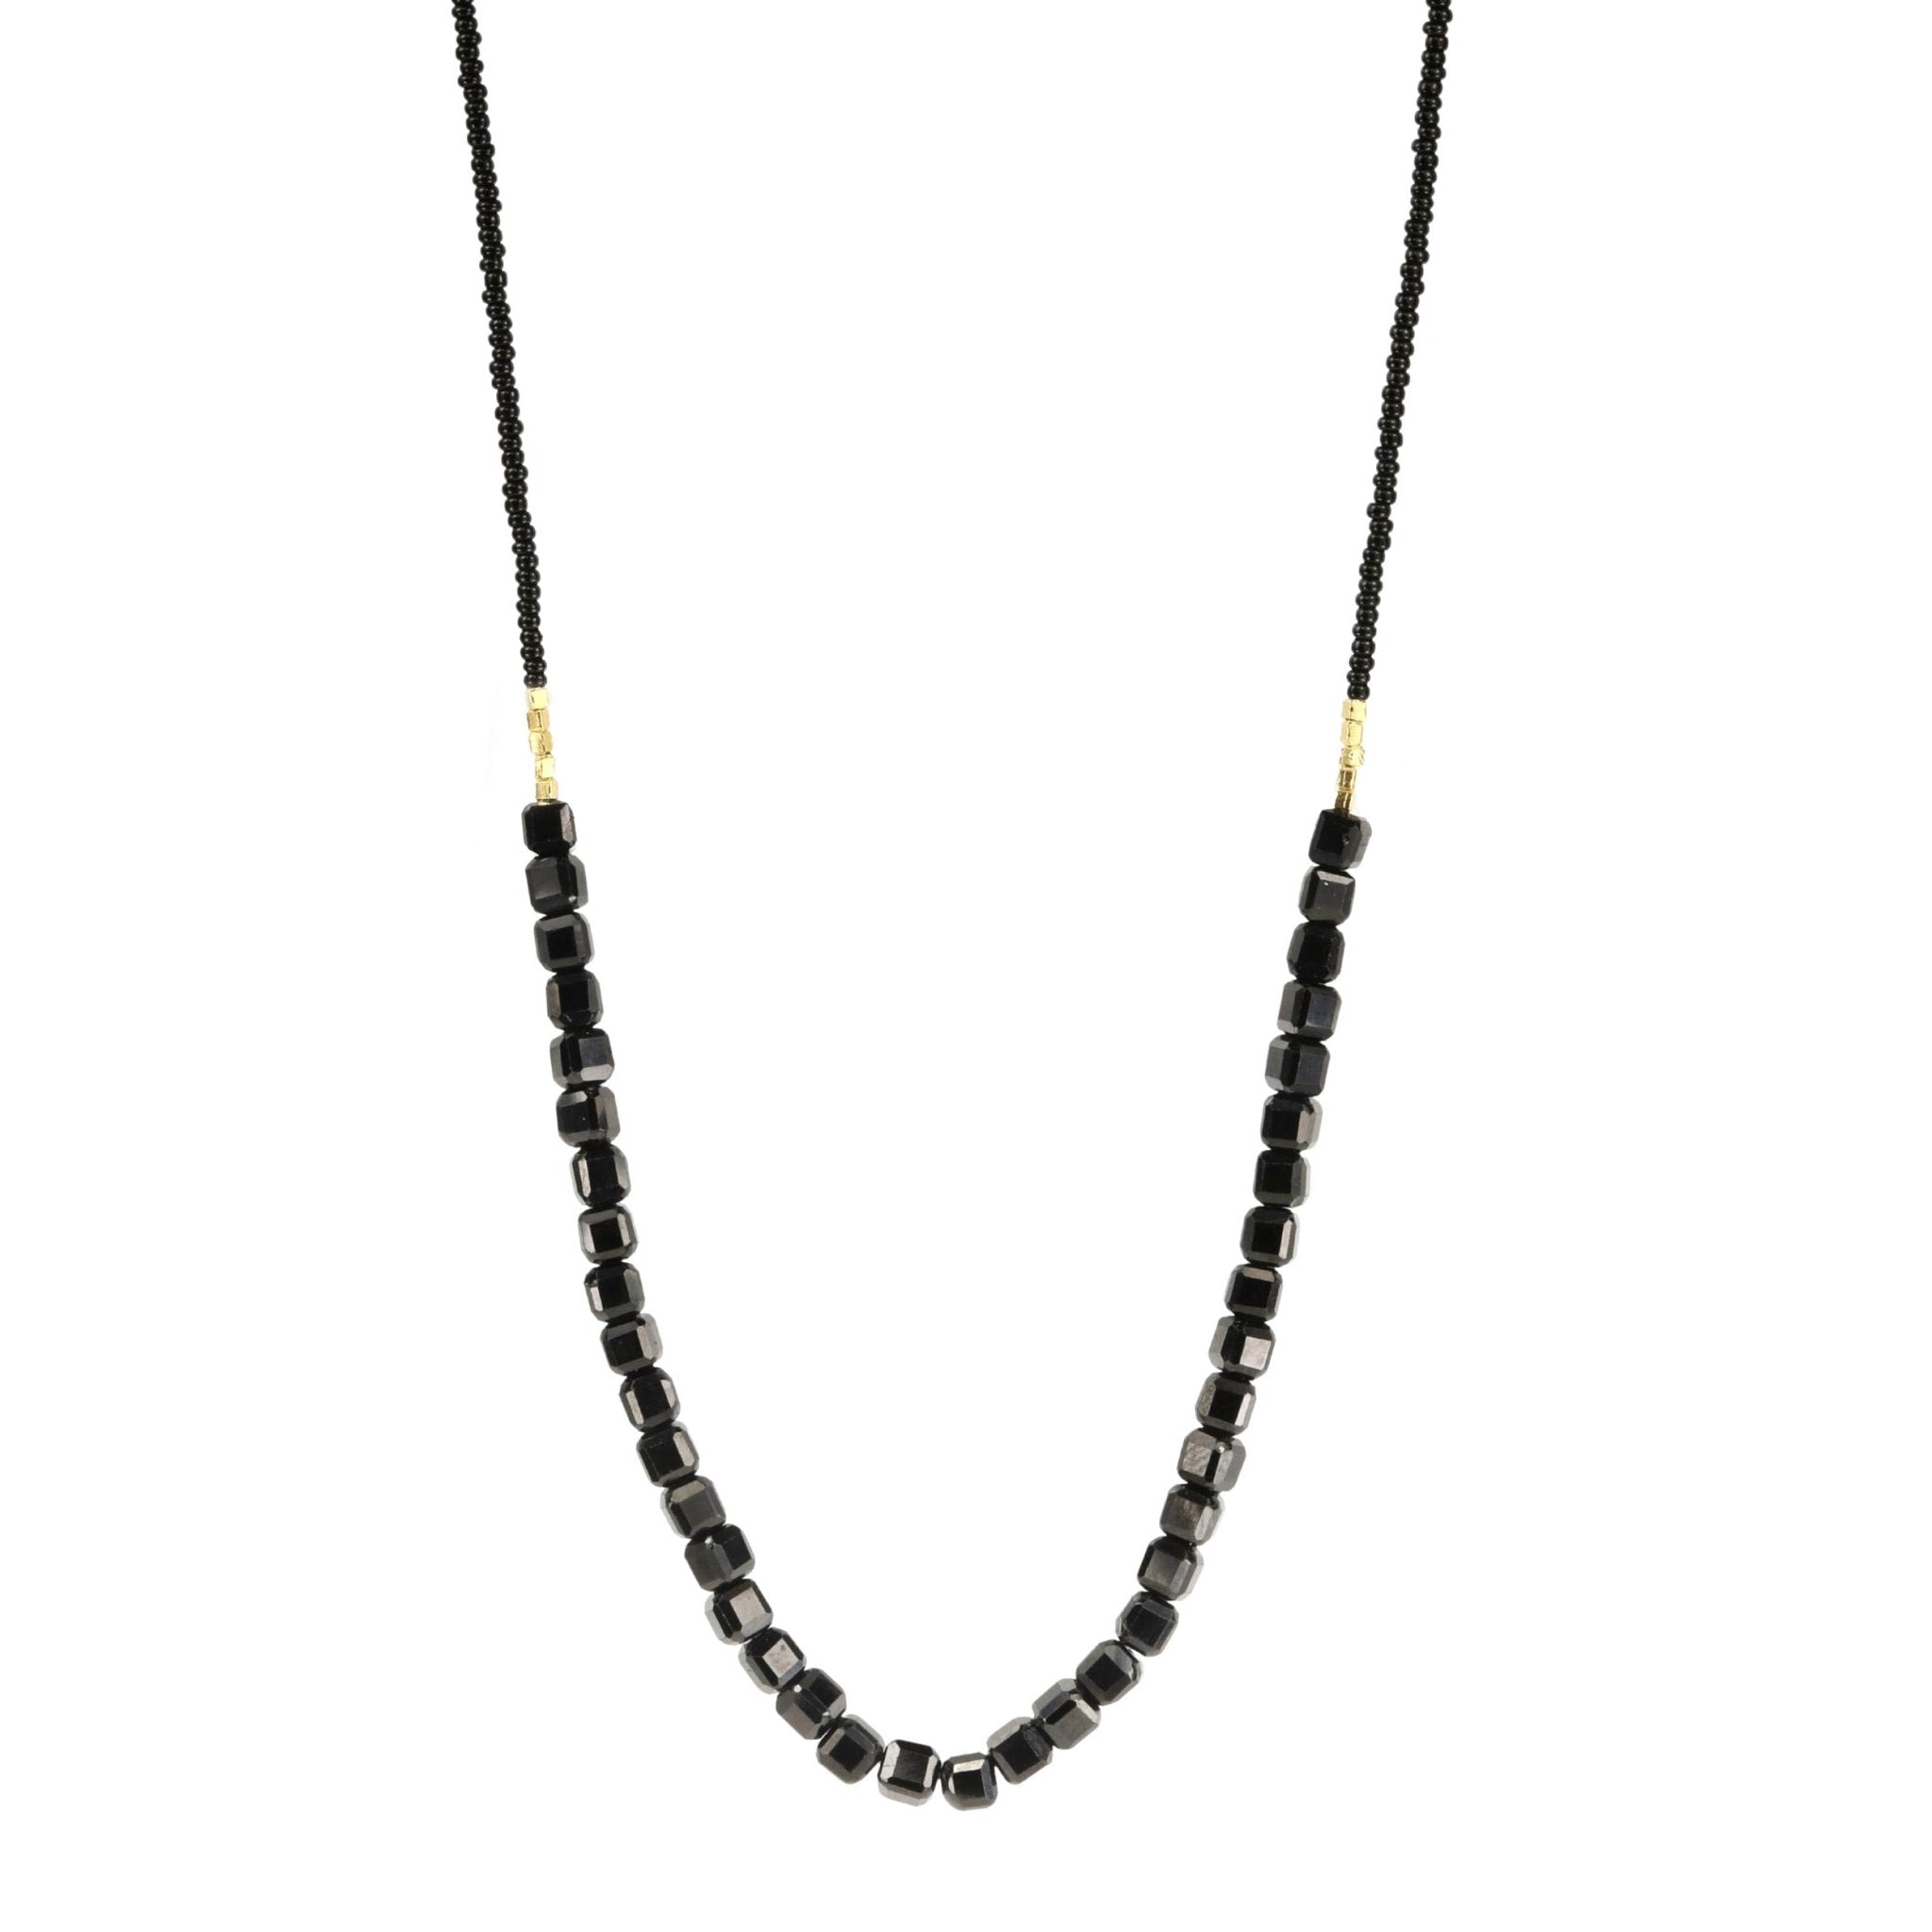 Black Seed Necklace with Gold Vermeil and Black Onyx Beads in Center